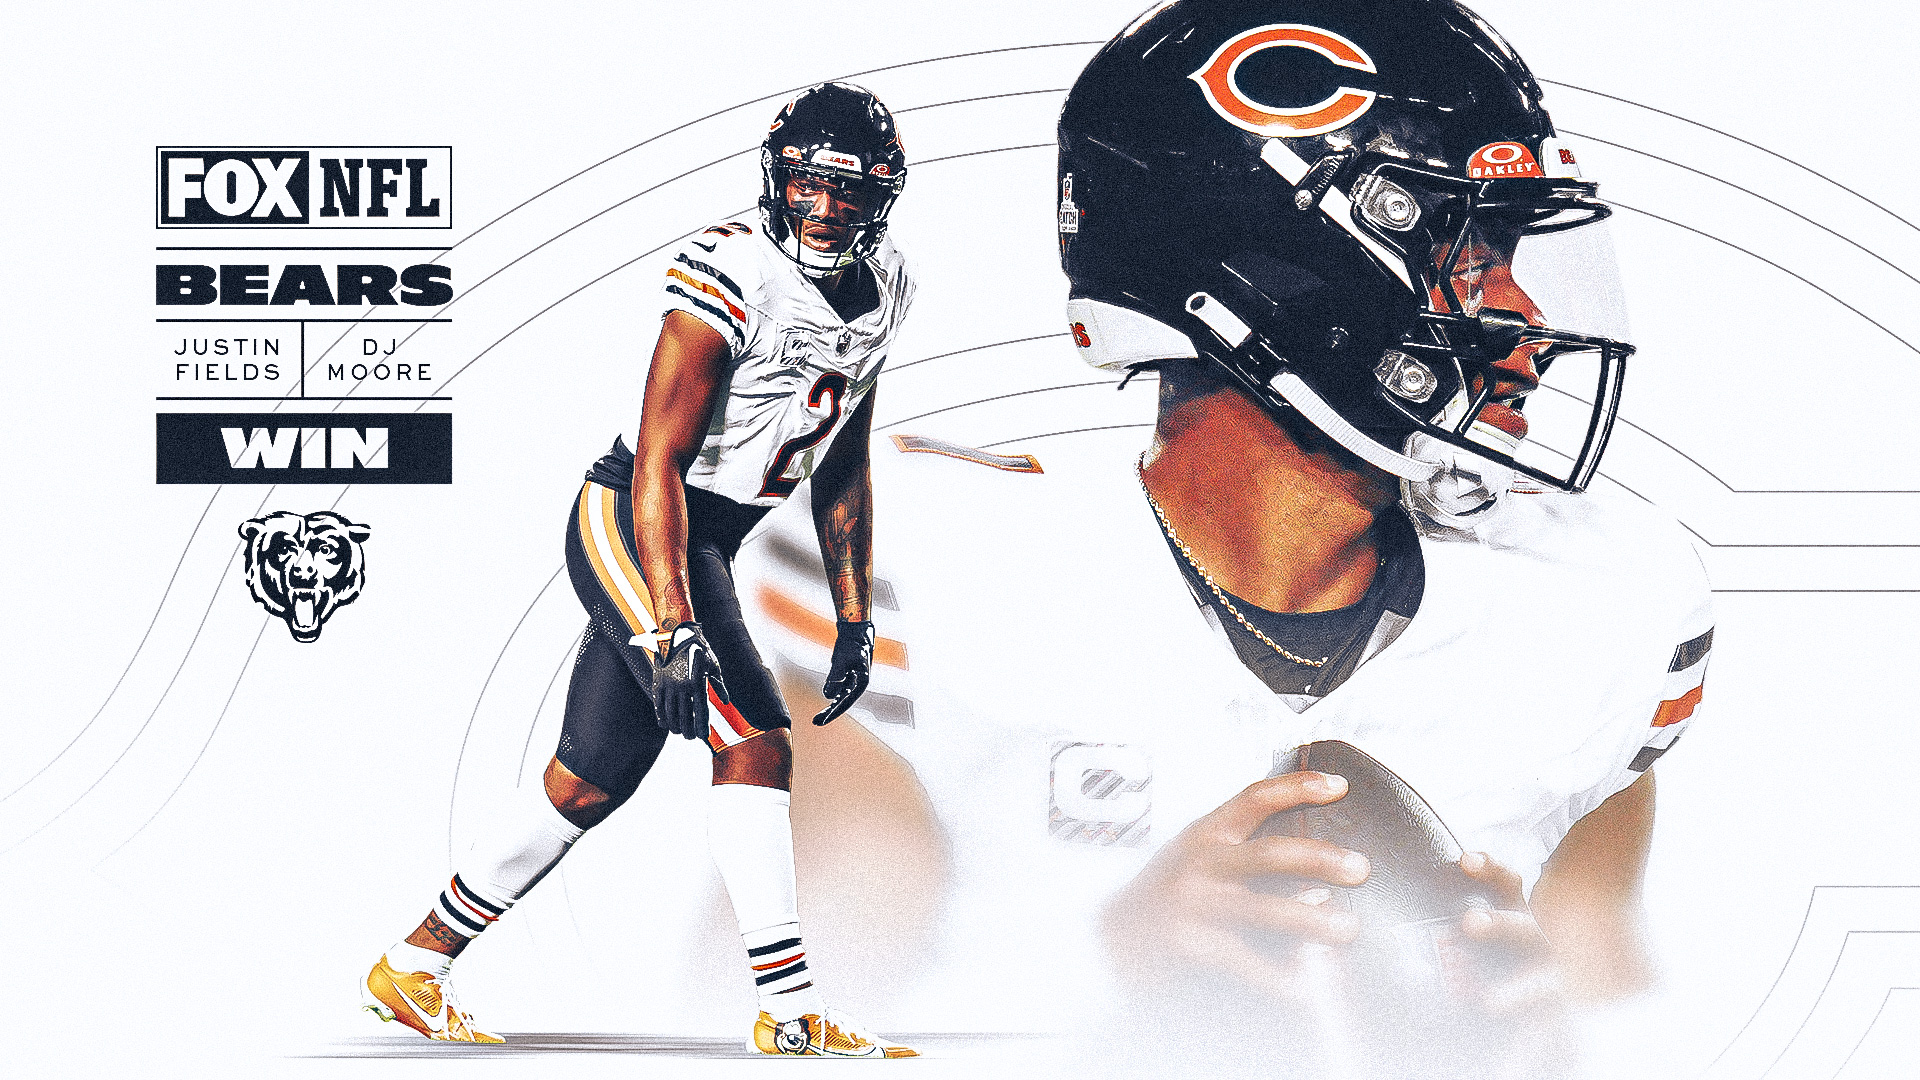 Justin Fields, D.J. Moore dominate as Bears win their first game in 2023